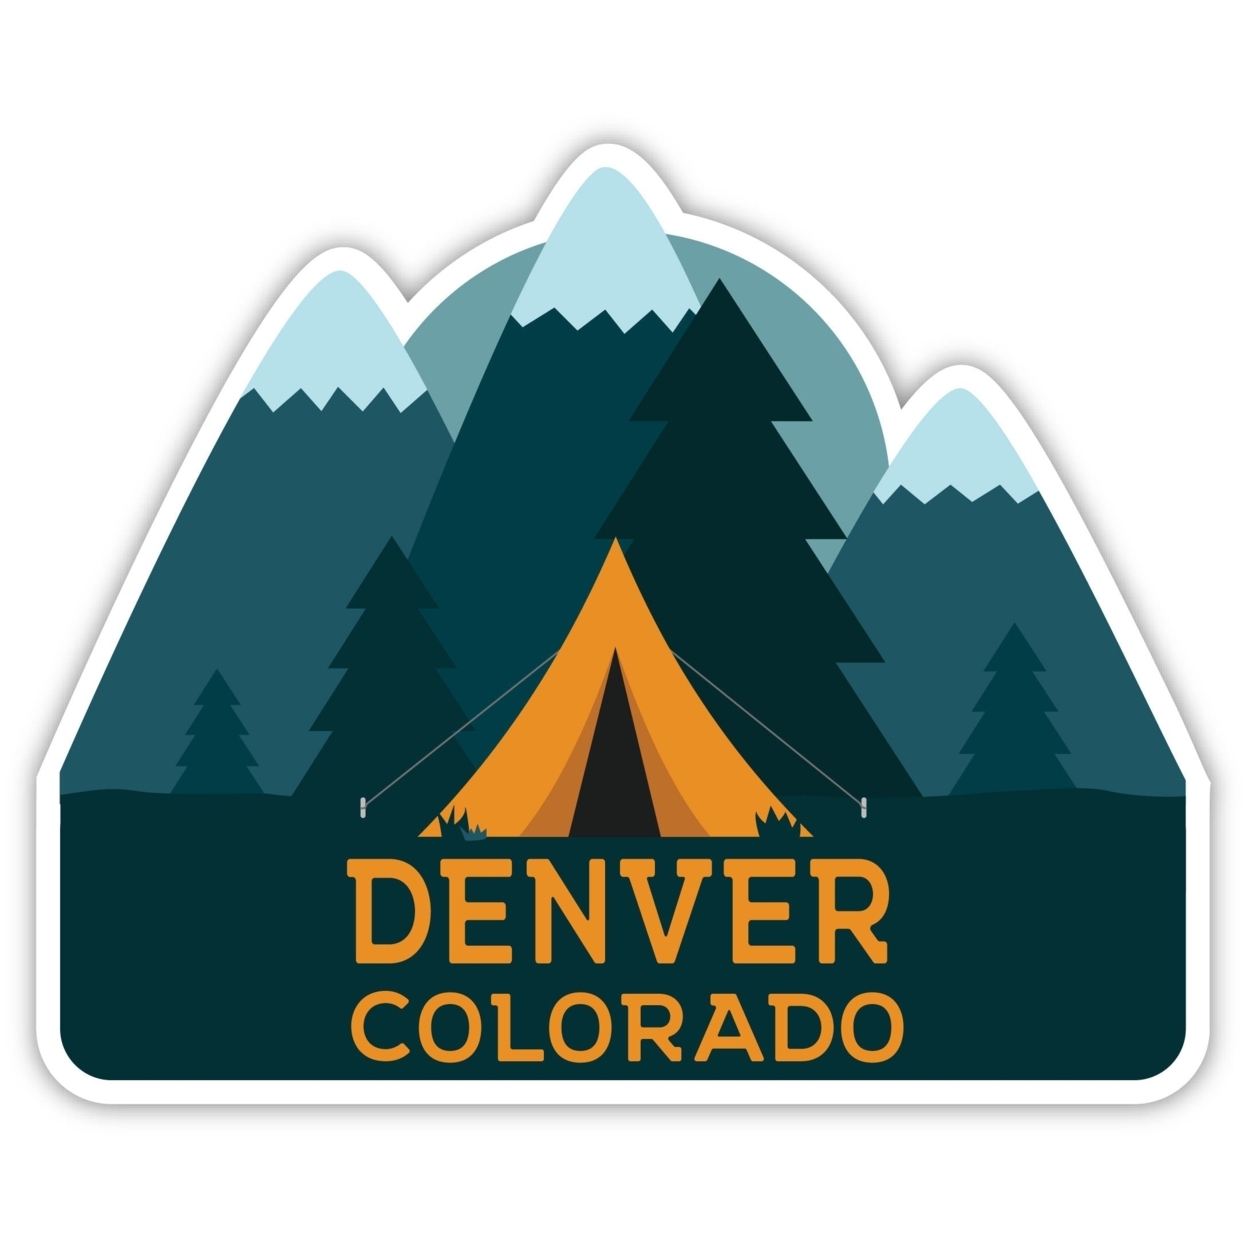 Denver Colorado Souvenir Decorative Stickers (Choose Theme And Size) - 4-Pack, 2-Inch, Great Outdoors